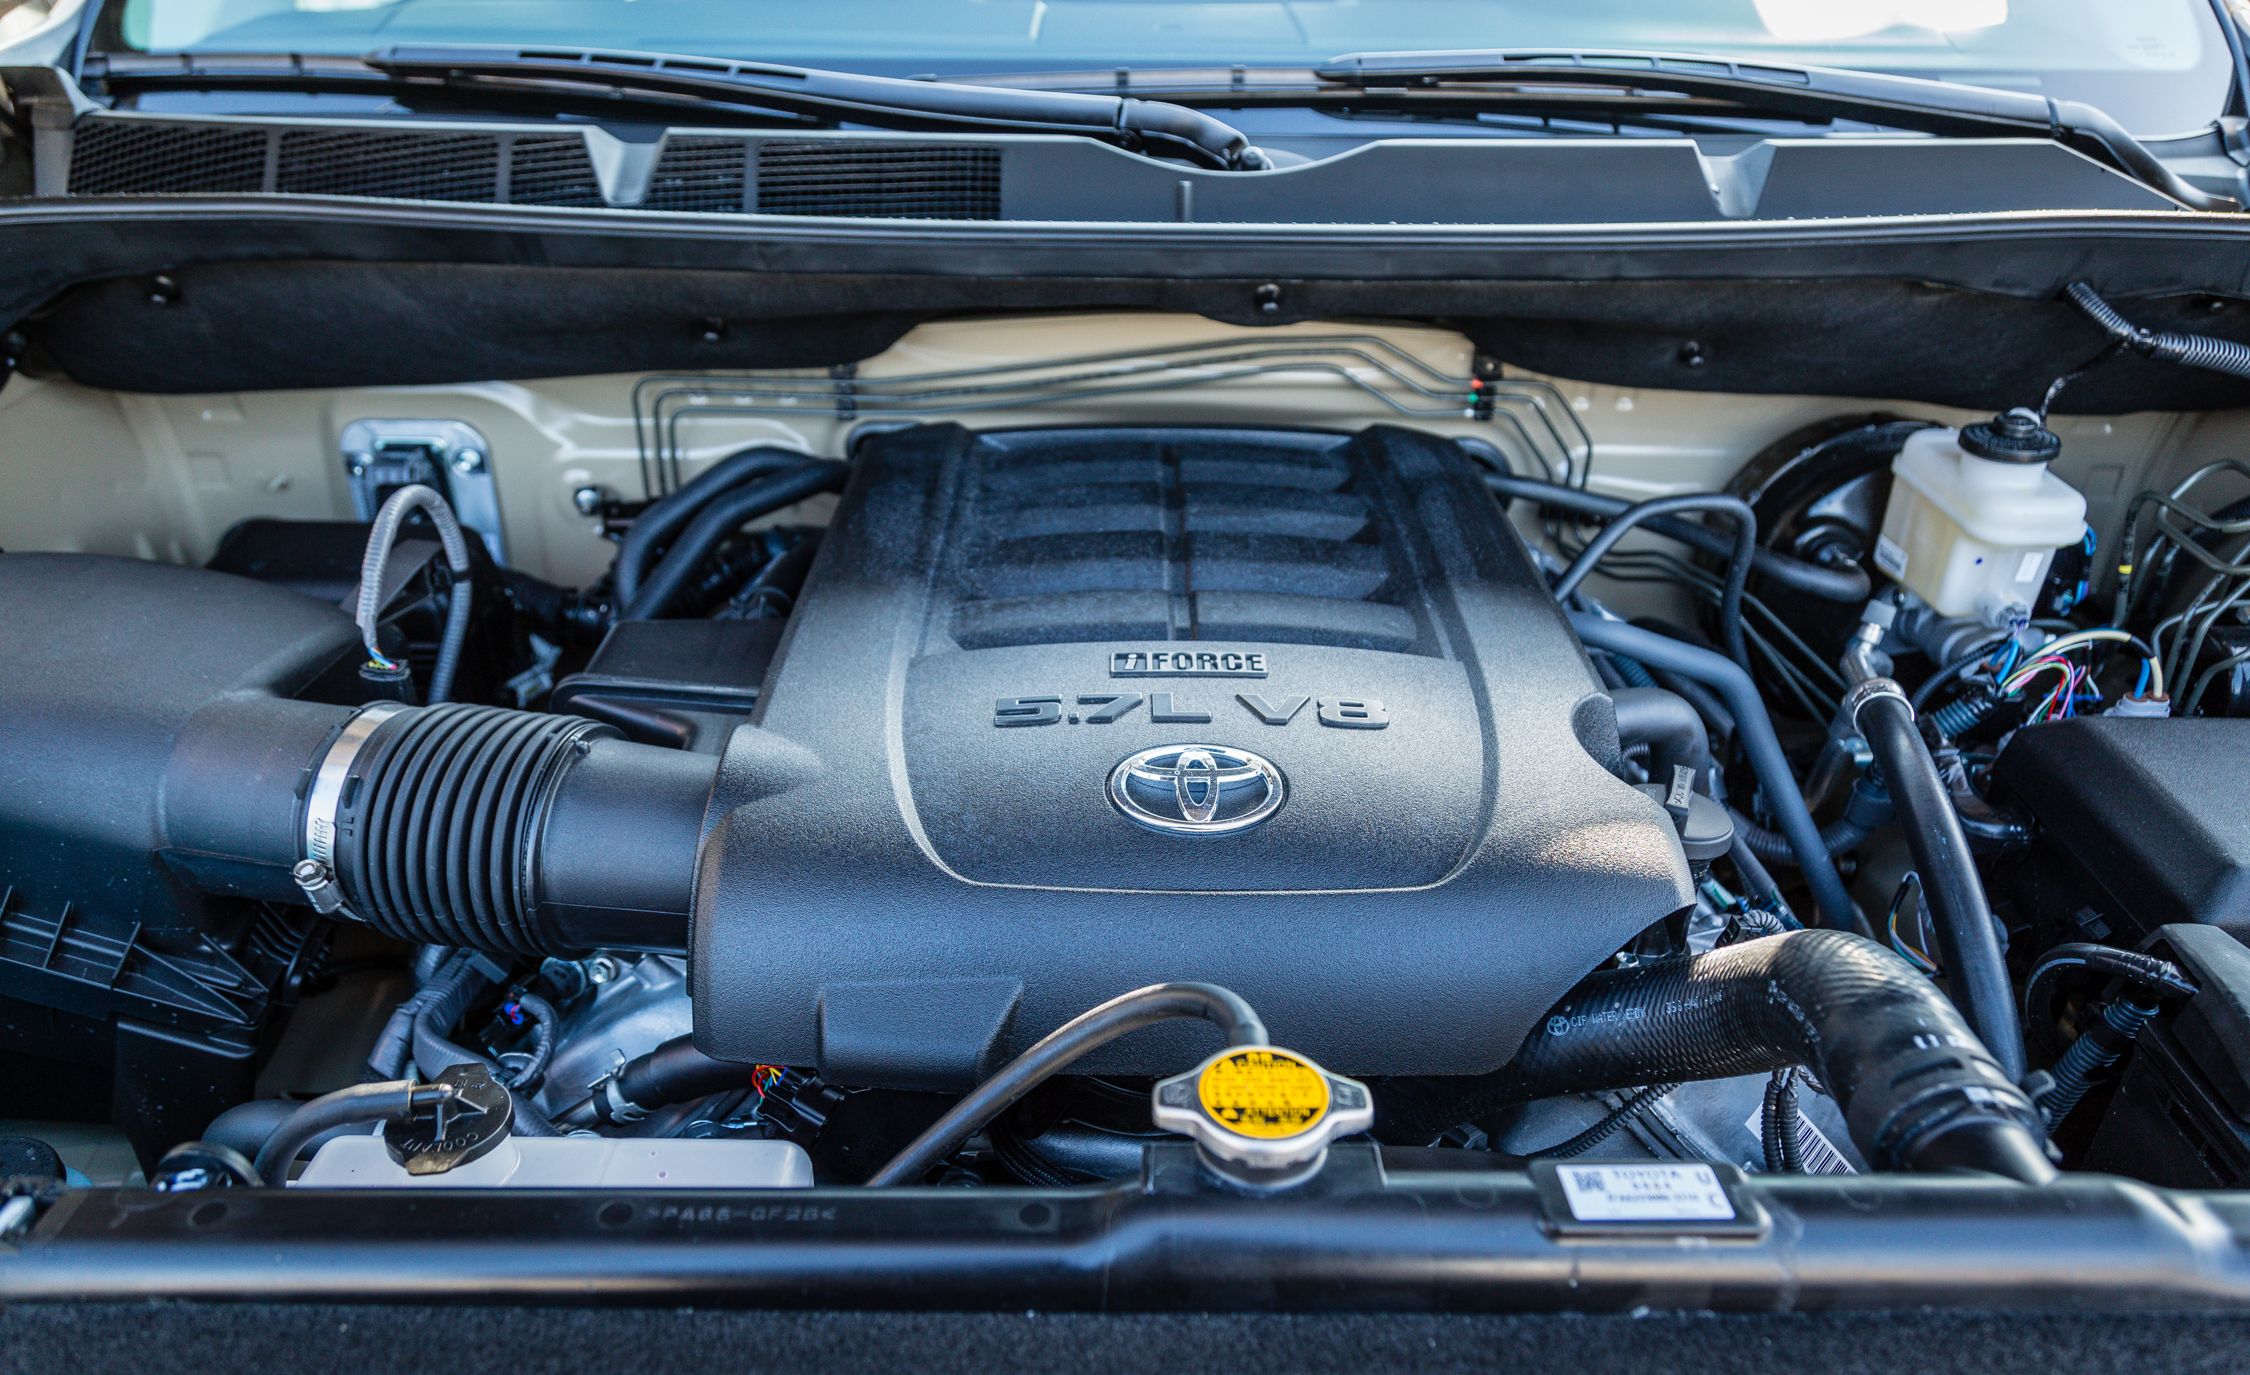 2017 Toyota Tundra View Engine (View 1 of 24)